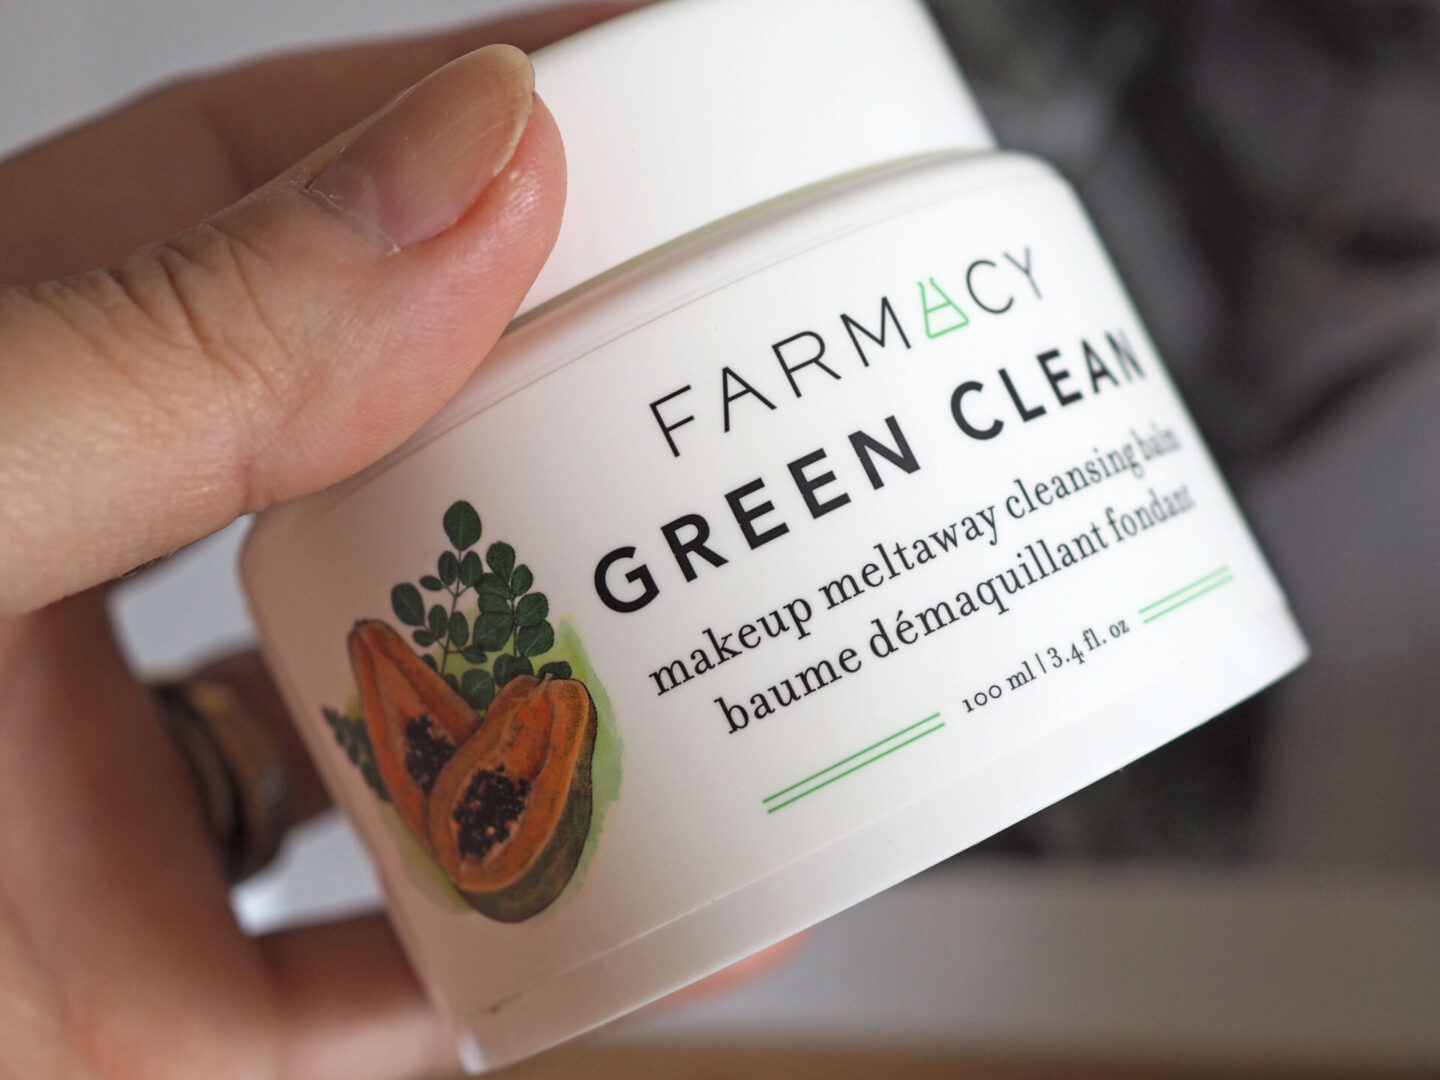 Farmacy green clean makeup meltaway cleansing balm review